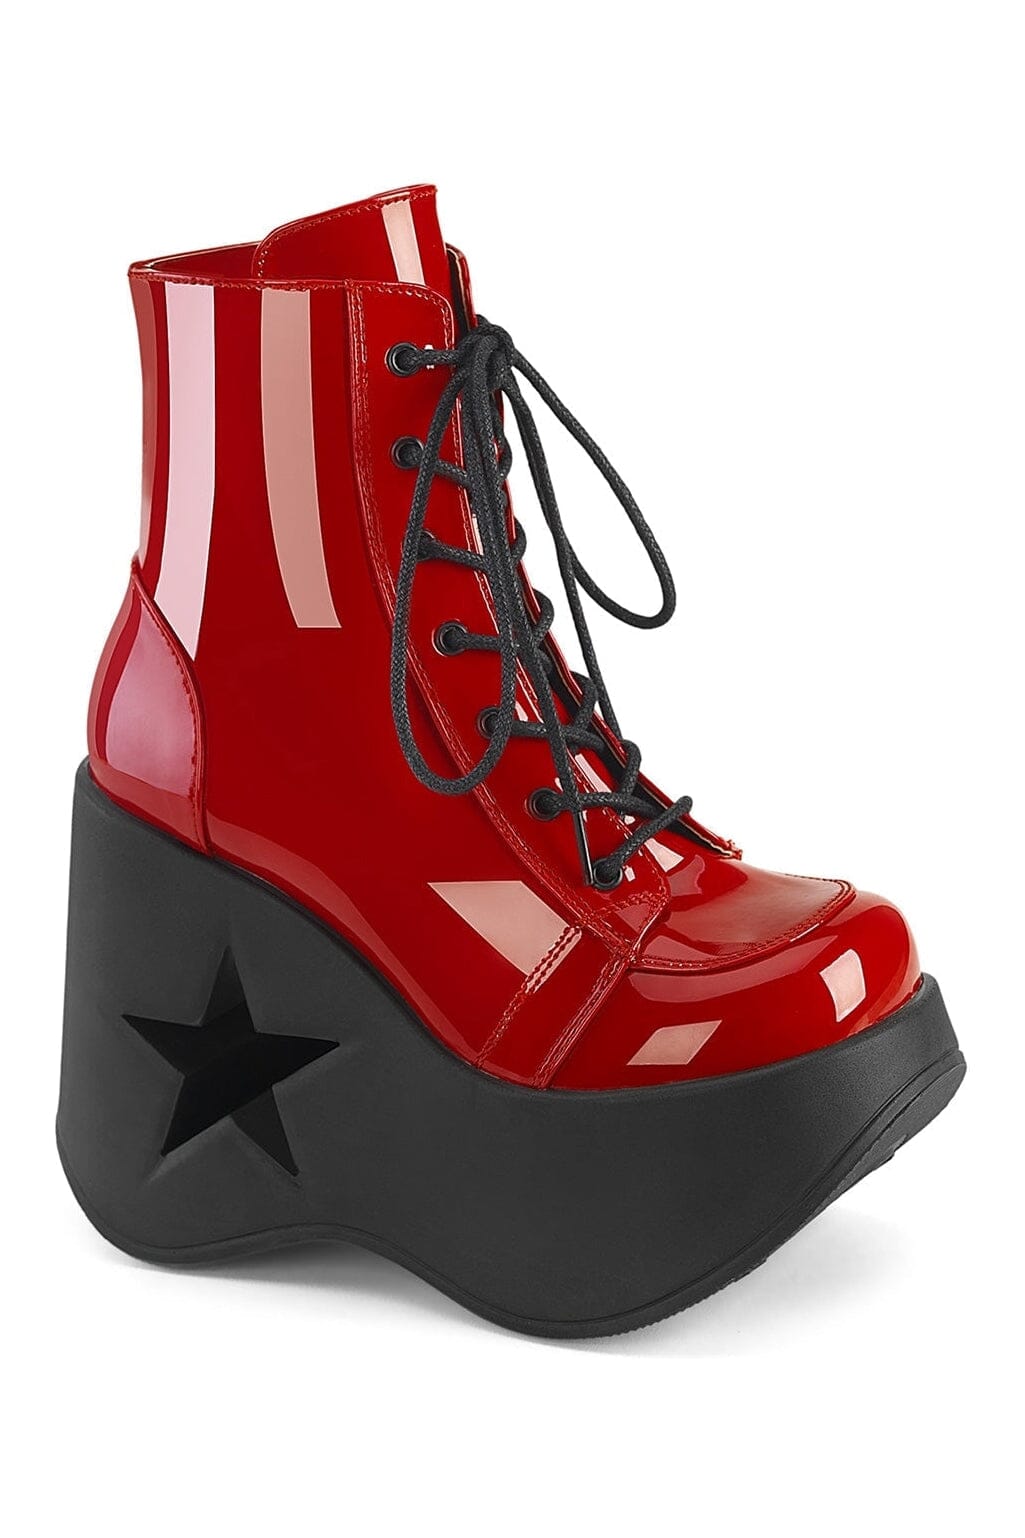 DYNAMITE-106 Red Patent Ankle Boot-Ankle Boots-Demonia-Red-10-Patent-SEXYSHOES.COM